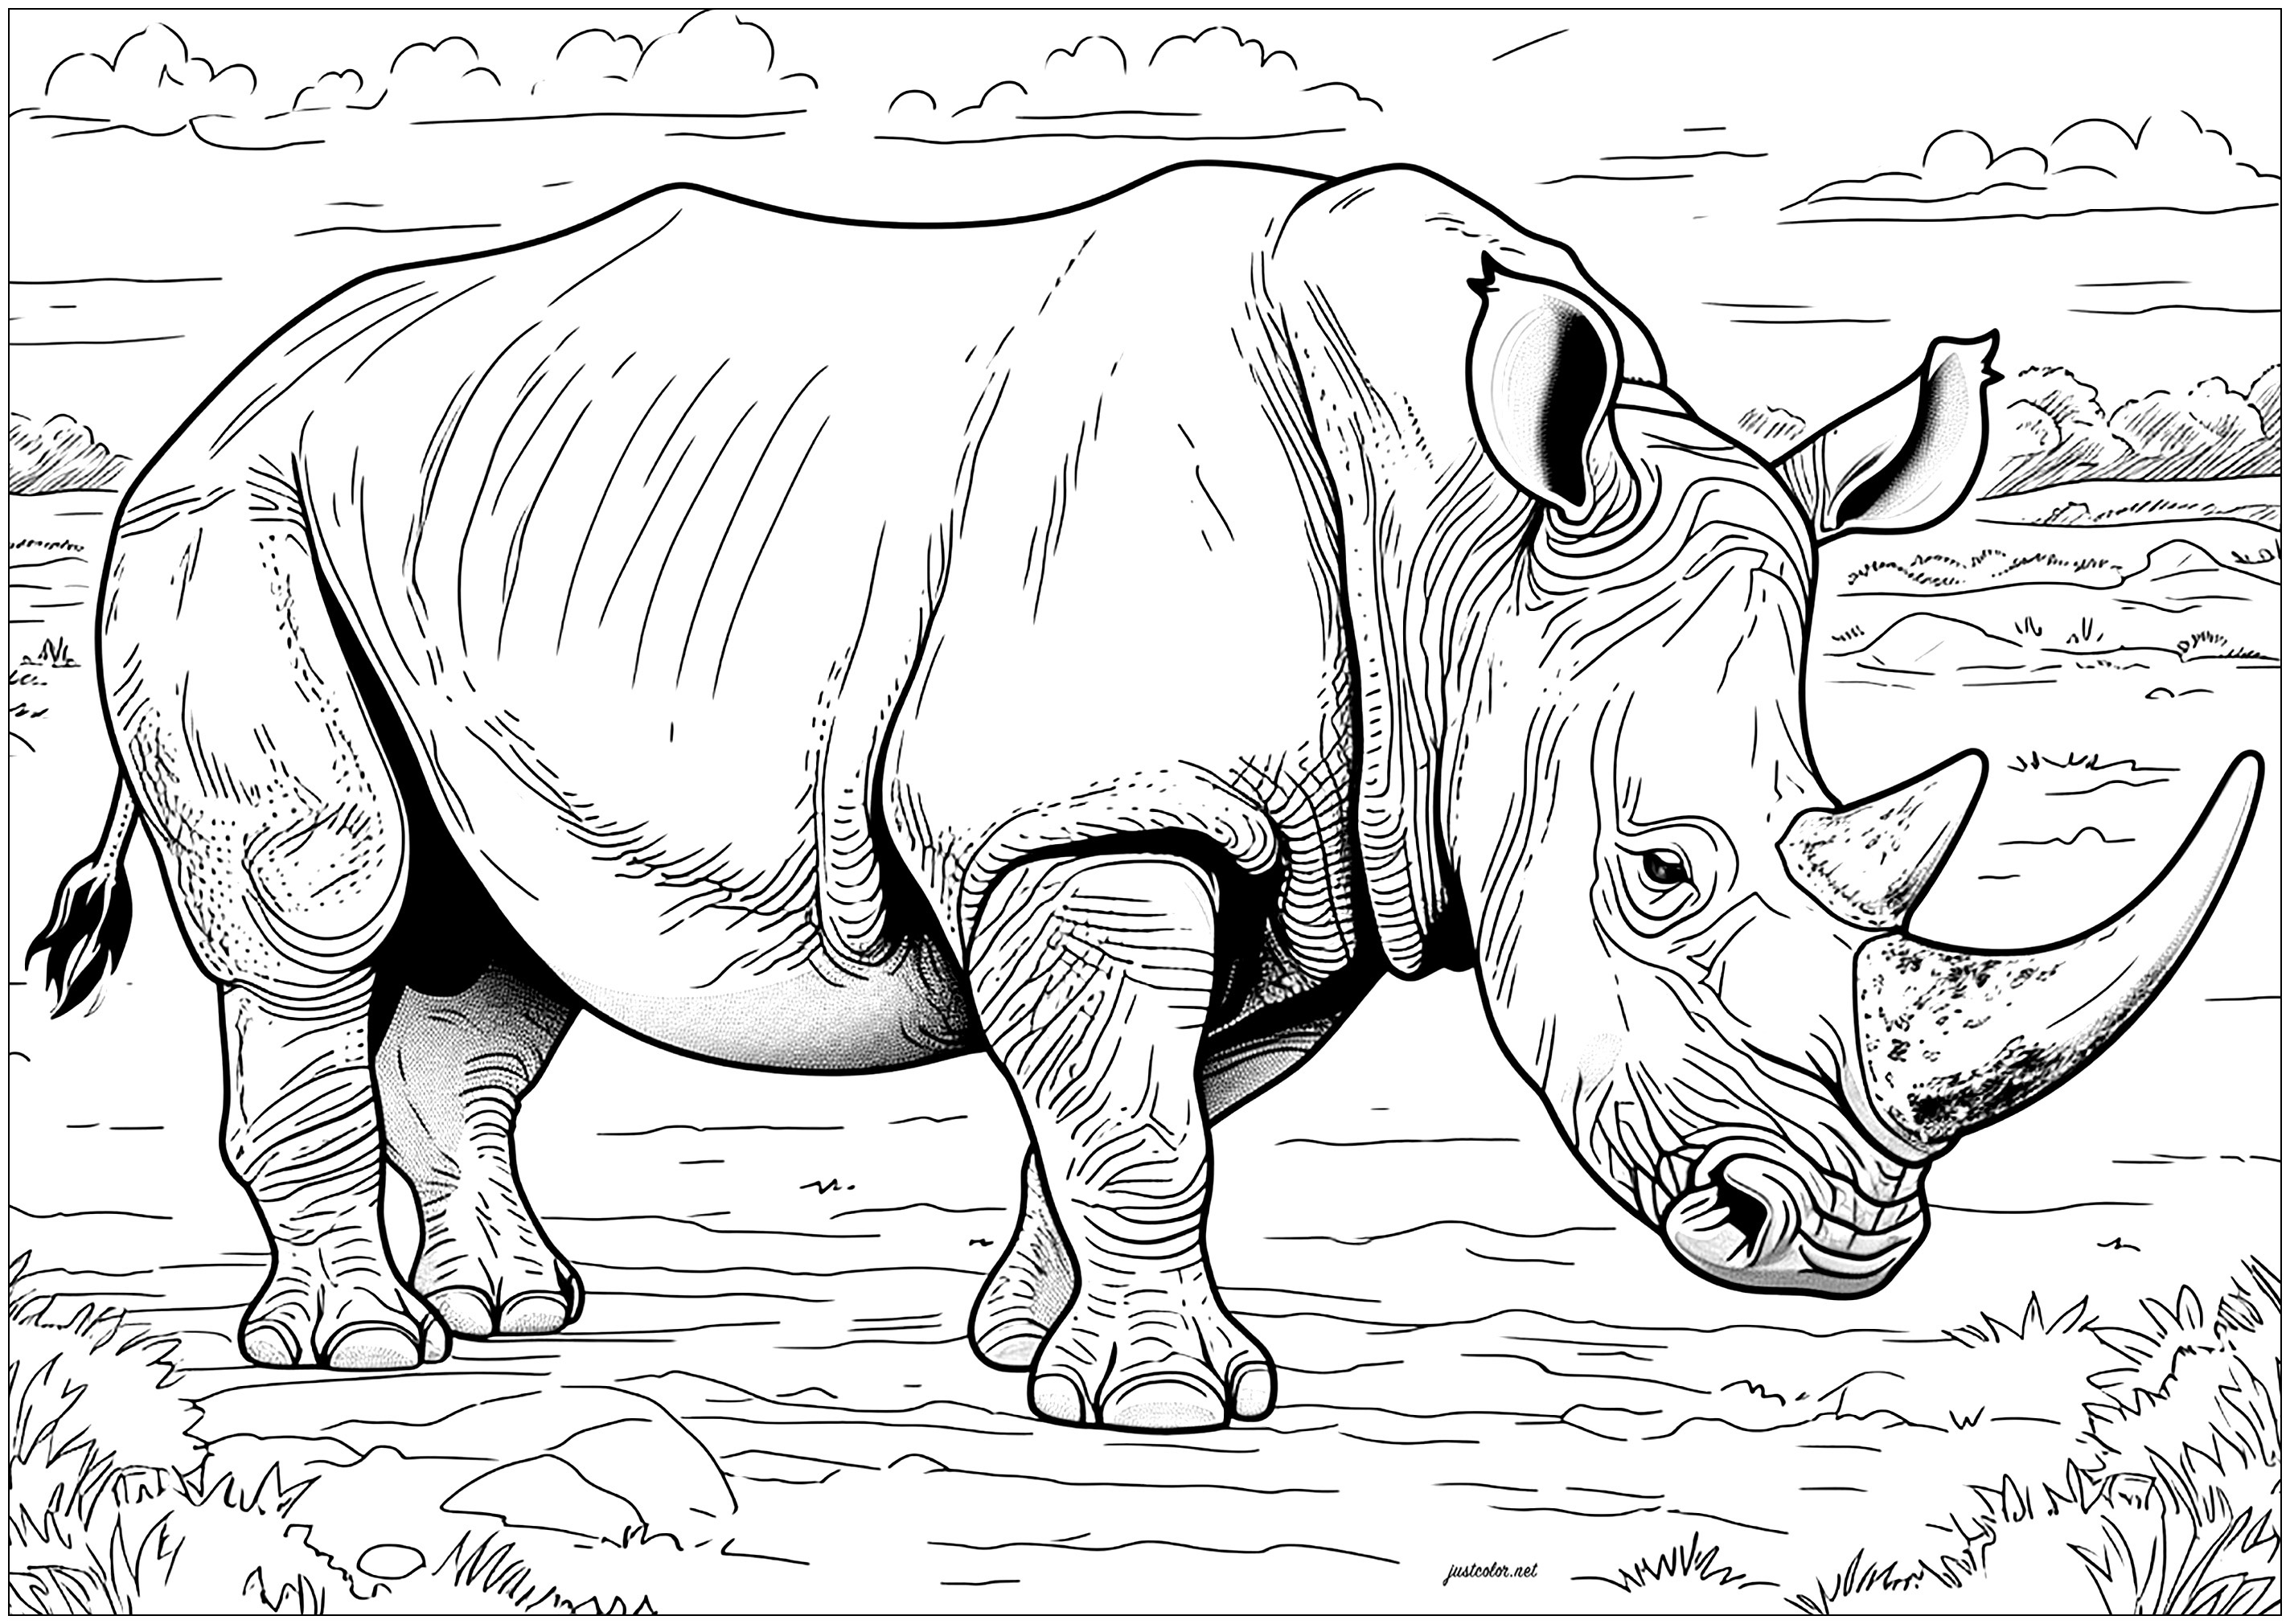 Realistic drawing of a Rhinoceros in its natural habitat